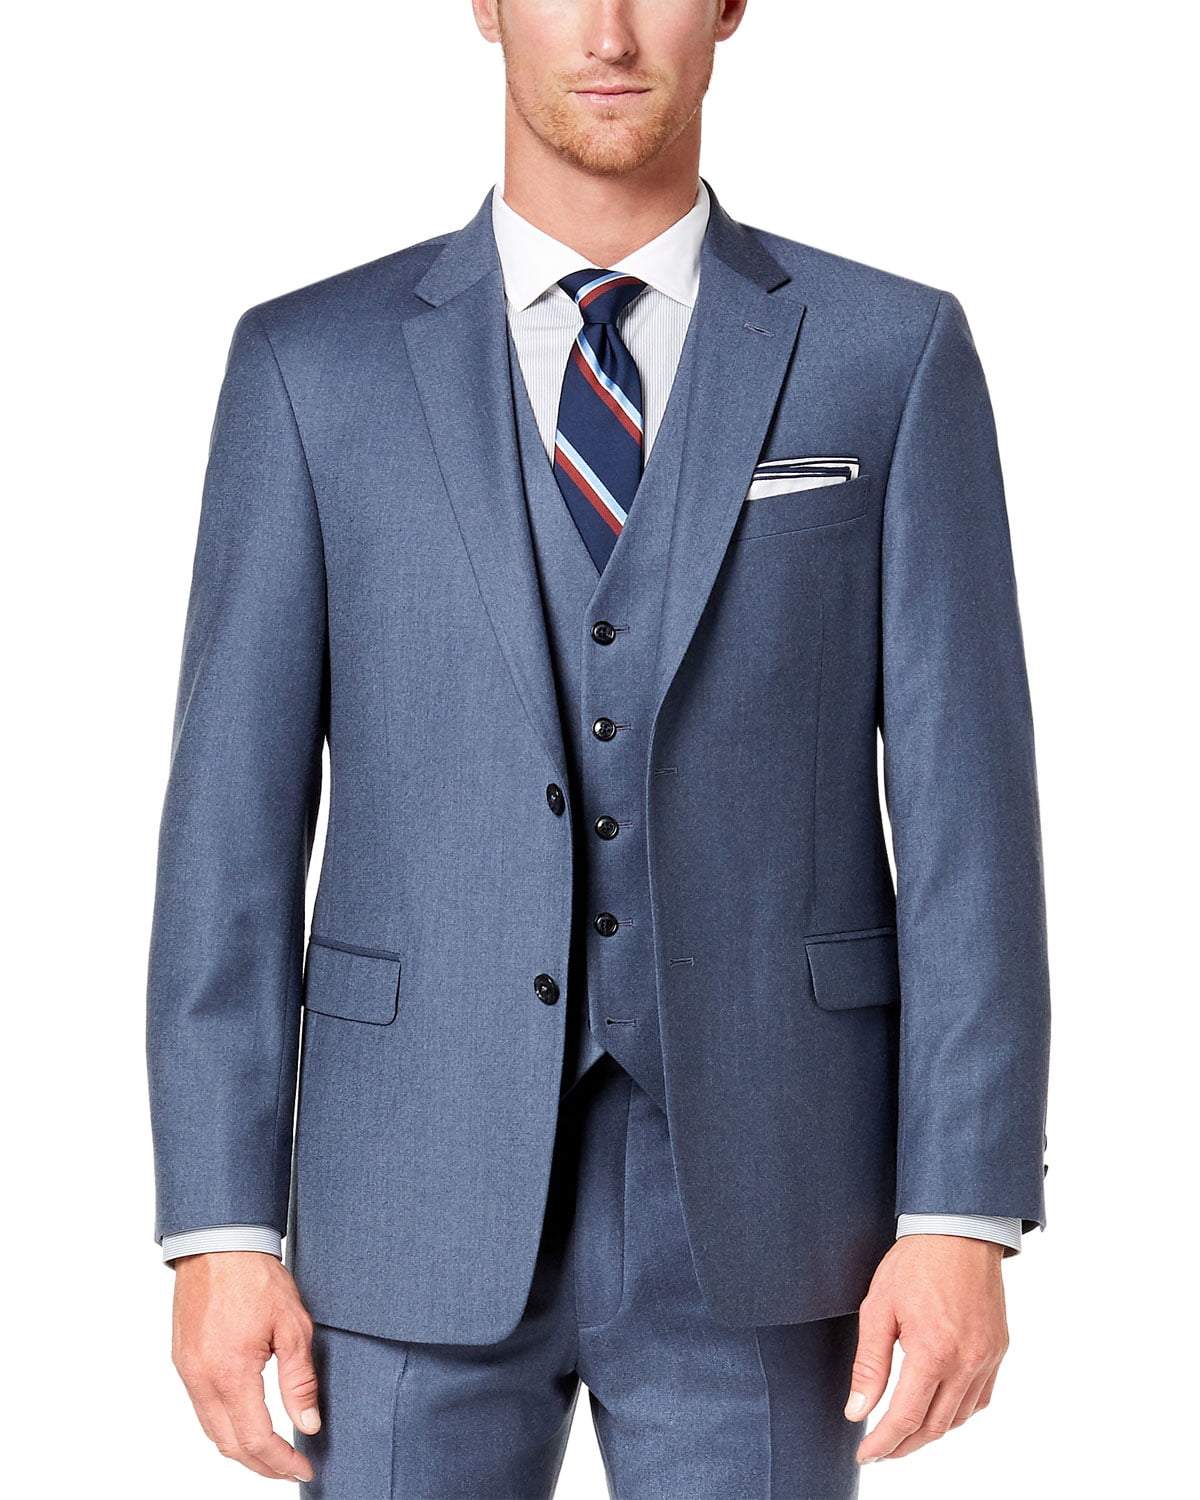 Tommy Hilfiger Mens Modern Fit Performance Suit with Stretch